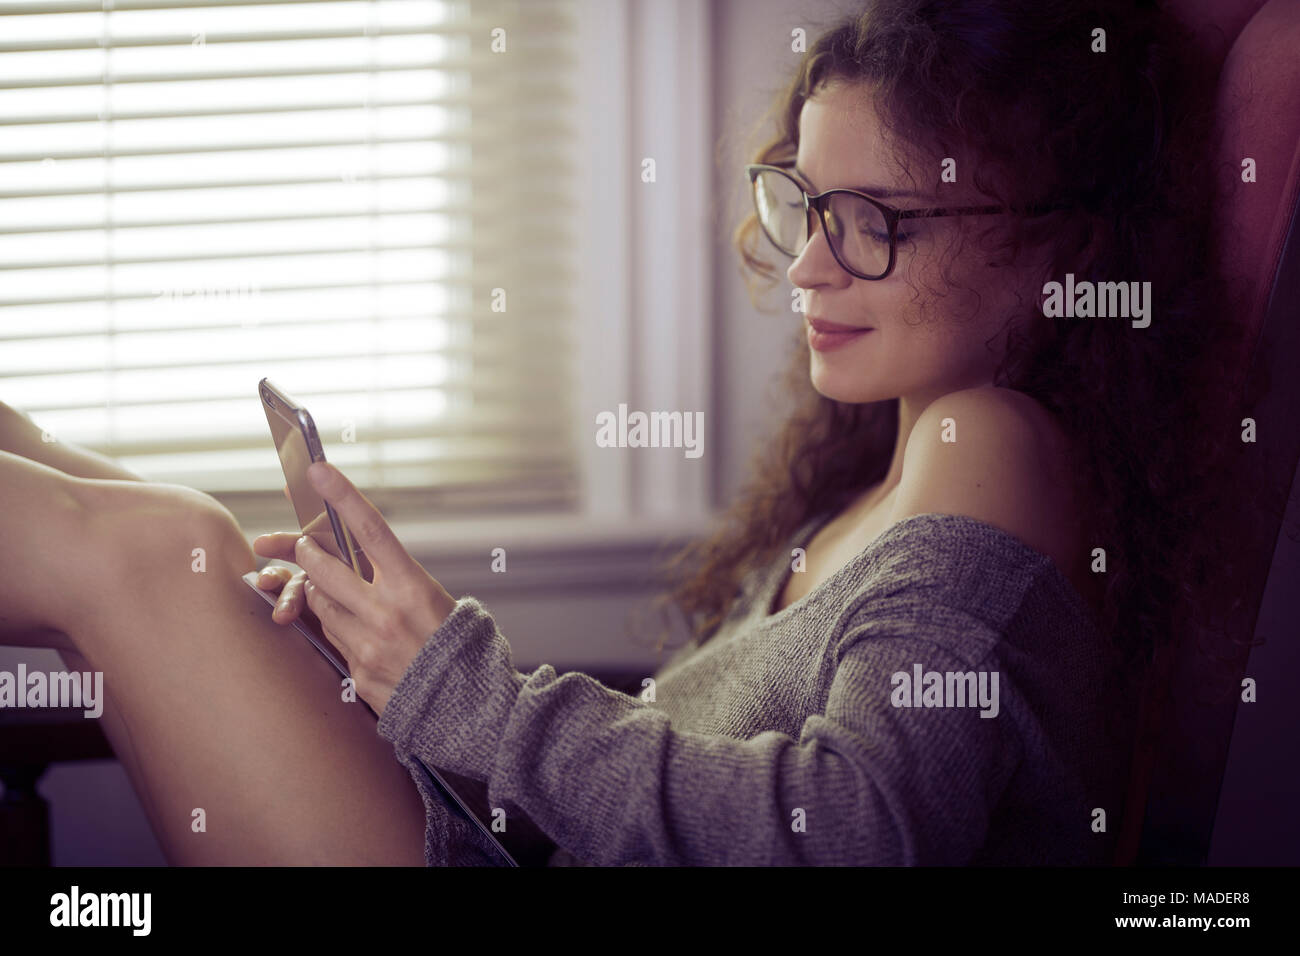 Portrait of a young smiling woman in reading glasses sitting with an iPhone in her hands in a chair by the window, texting, messaging concept Stock Photo